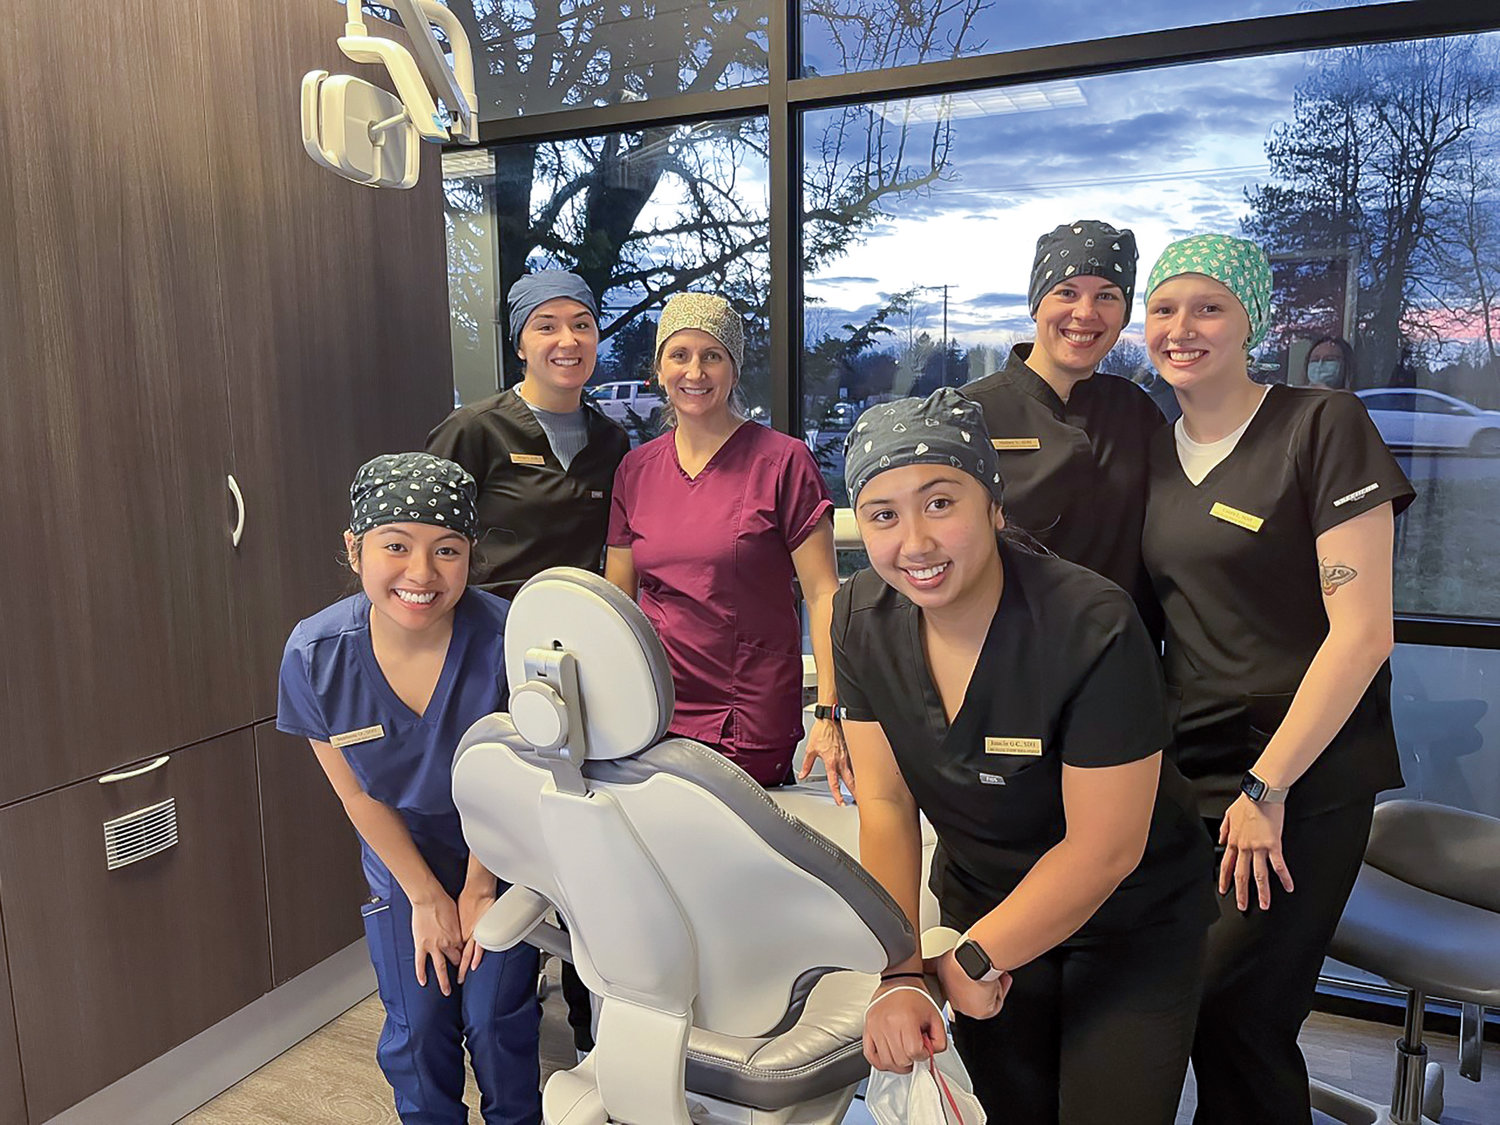 Battle Ground HealthCare has partnered with the dental hygiene program at Clark College to provide students with hands-on experience in a clinic setting.